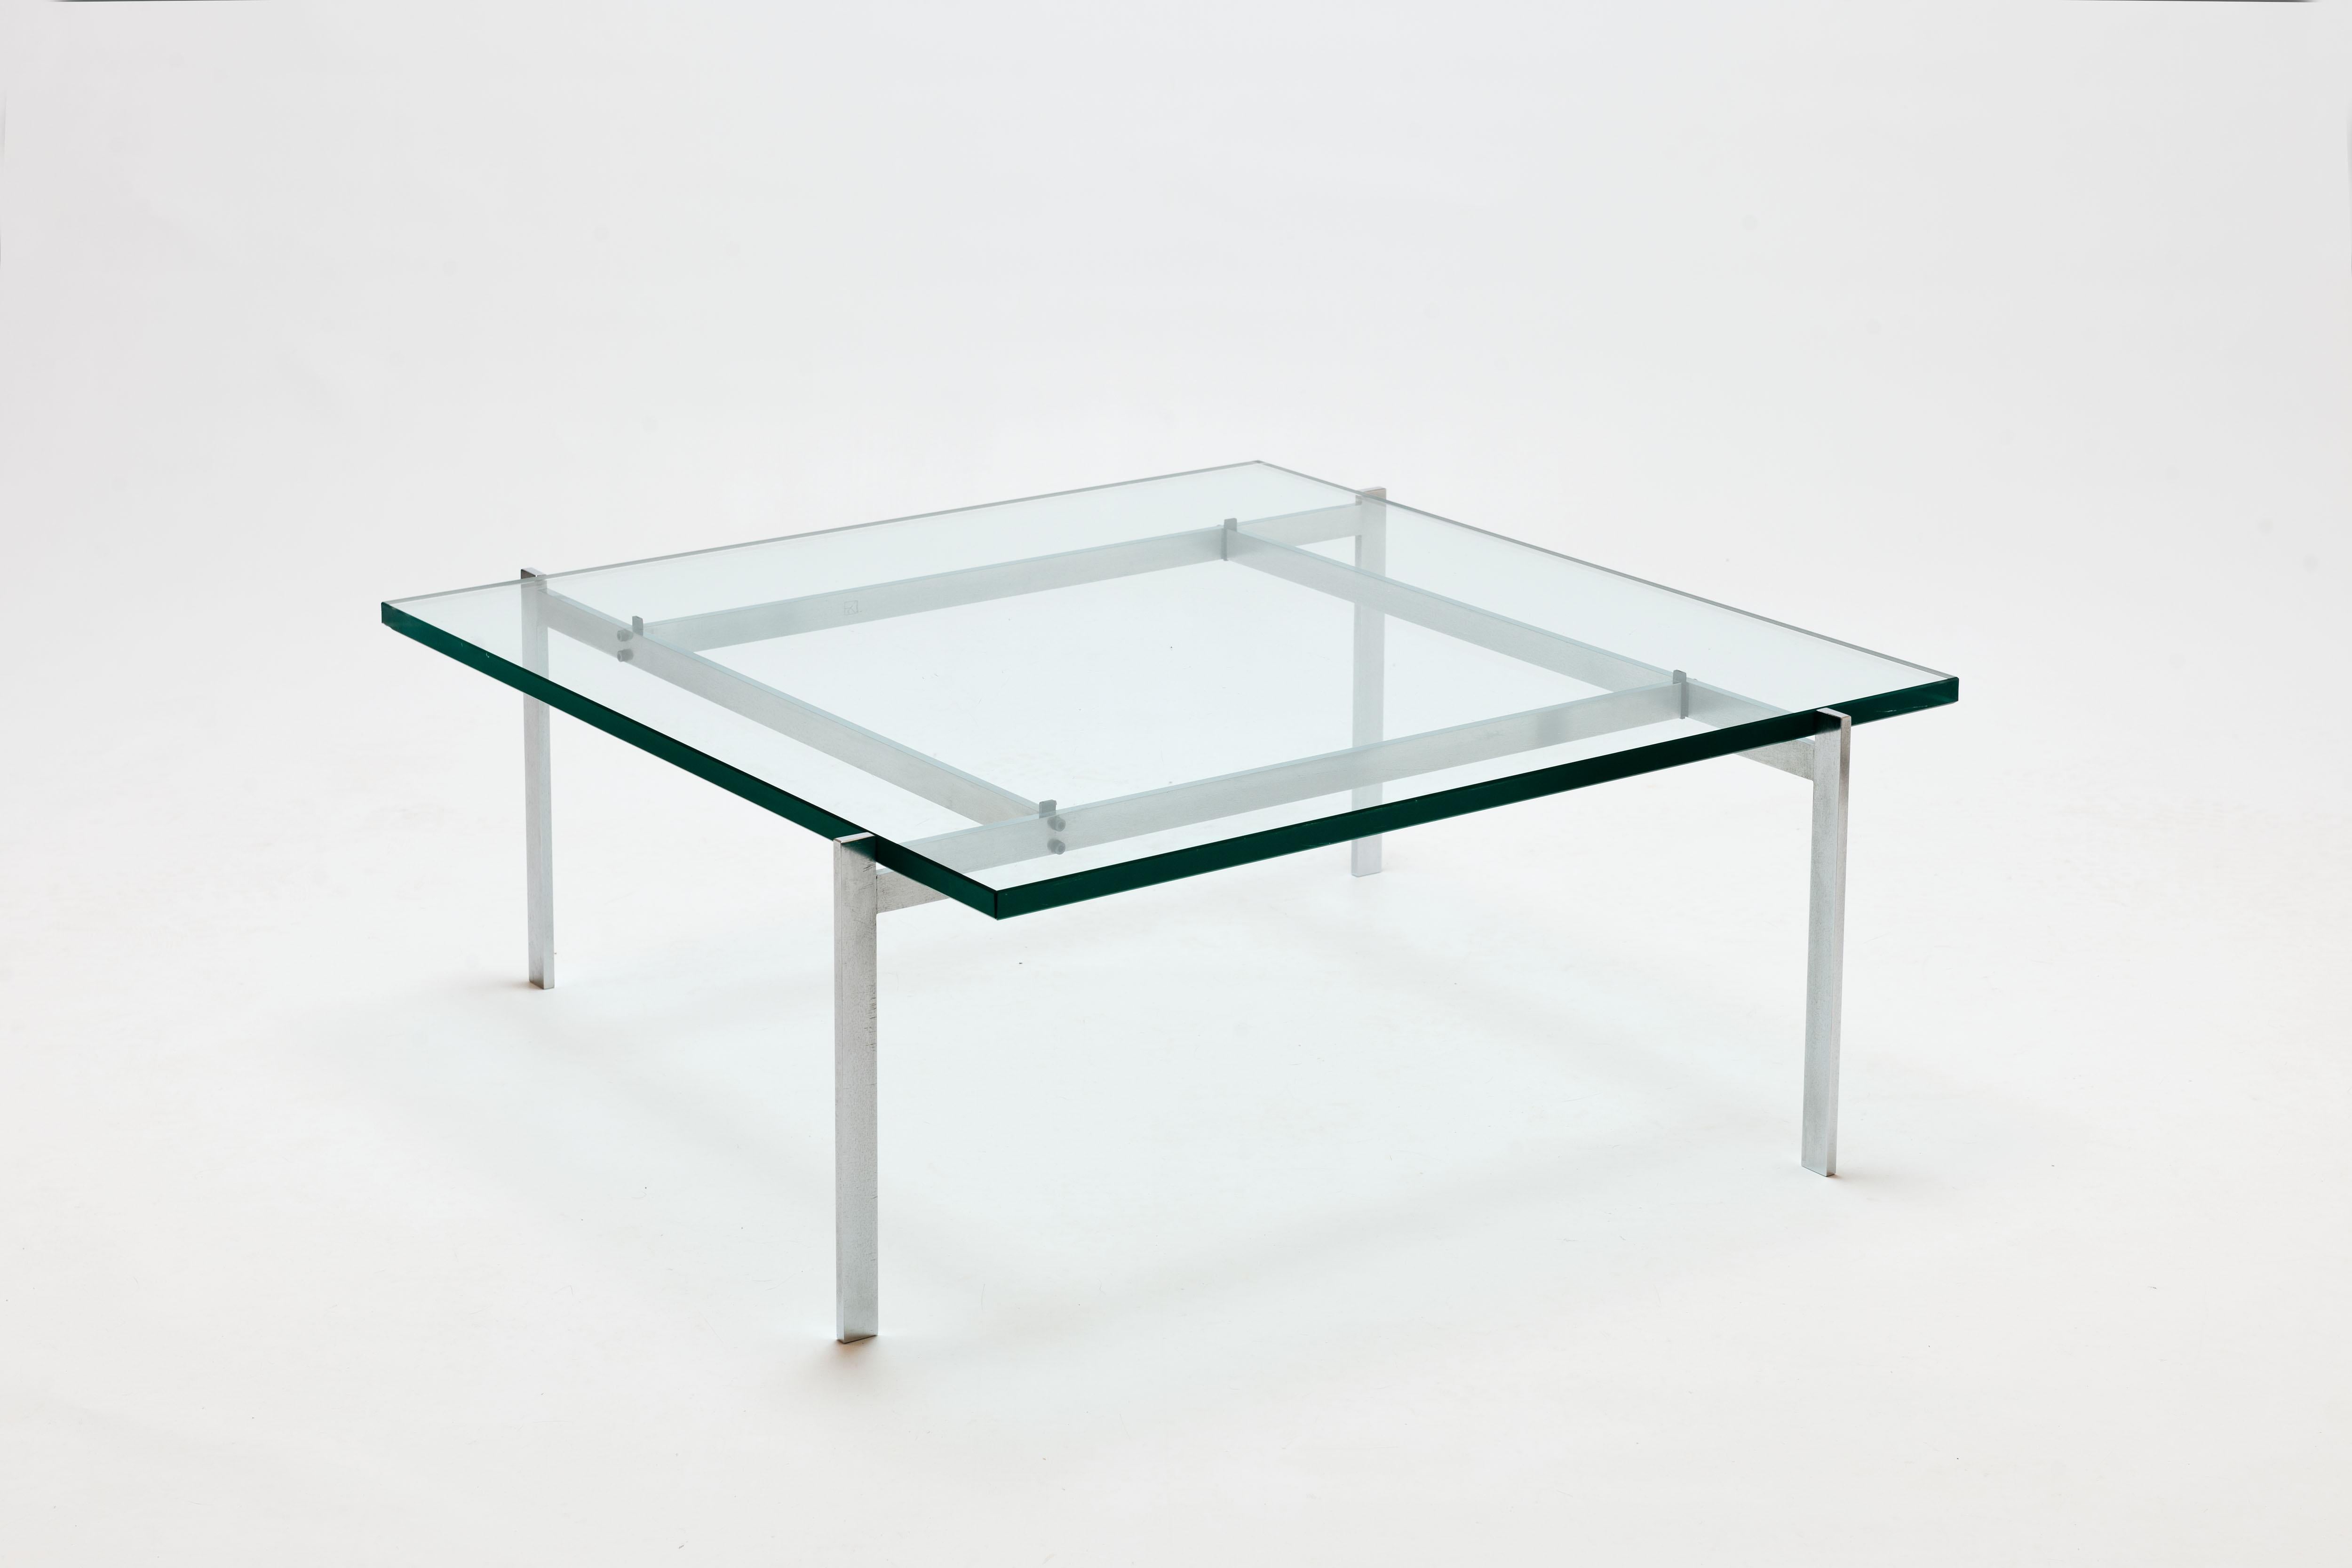 Coffee table model PK61 with transparent glass top. Matt chrome-plated steel base in perfect proportions. 
This aesthetic design serves as a powerful manifesto, depicting Kjærholm's development from Industrial designer to exceptional furniture